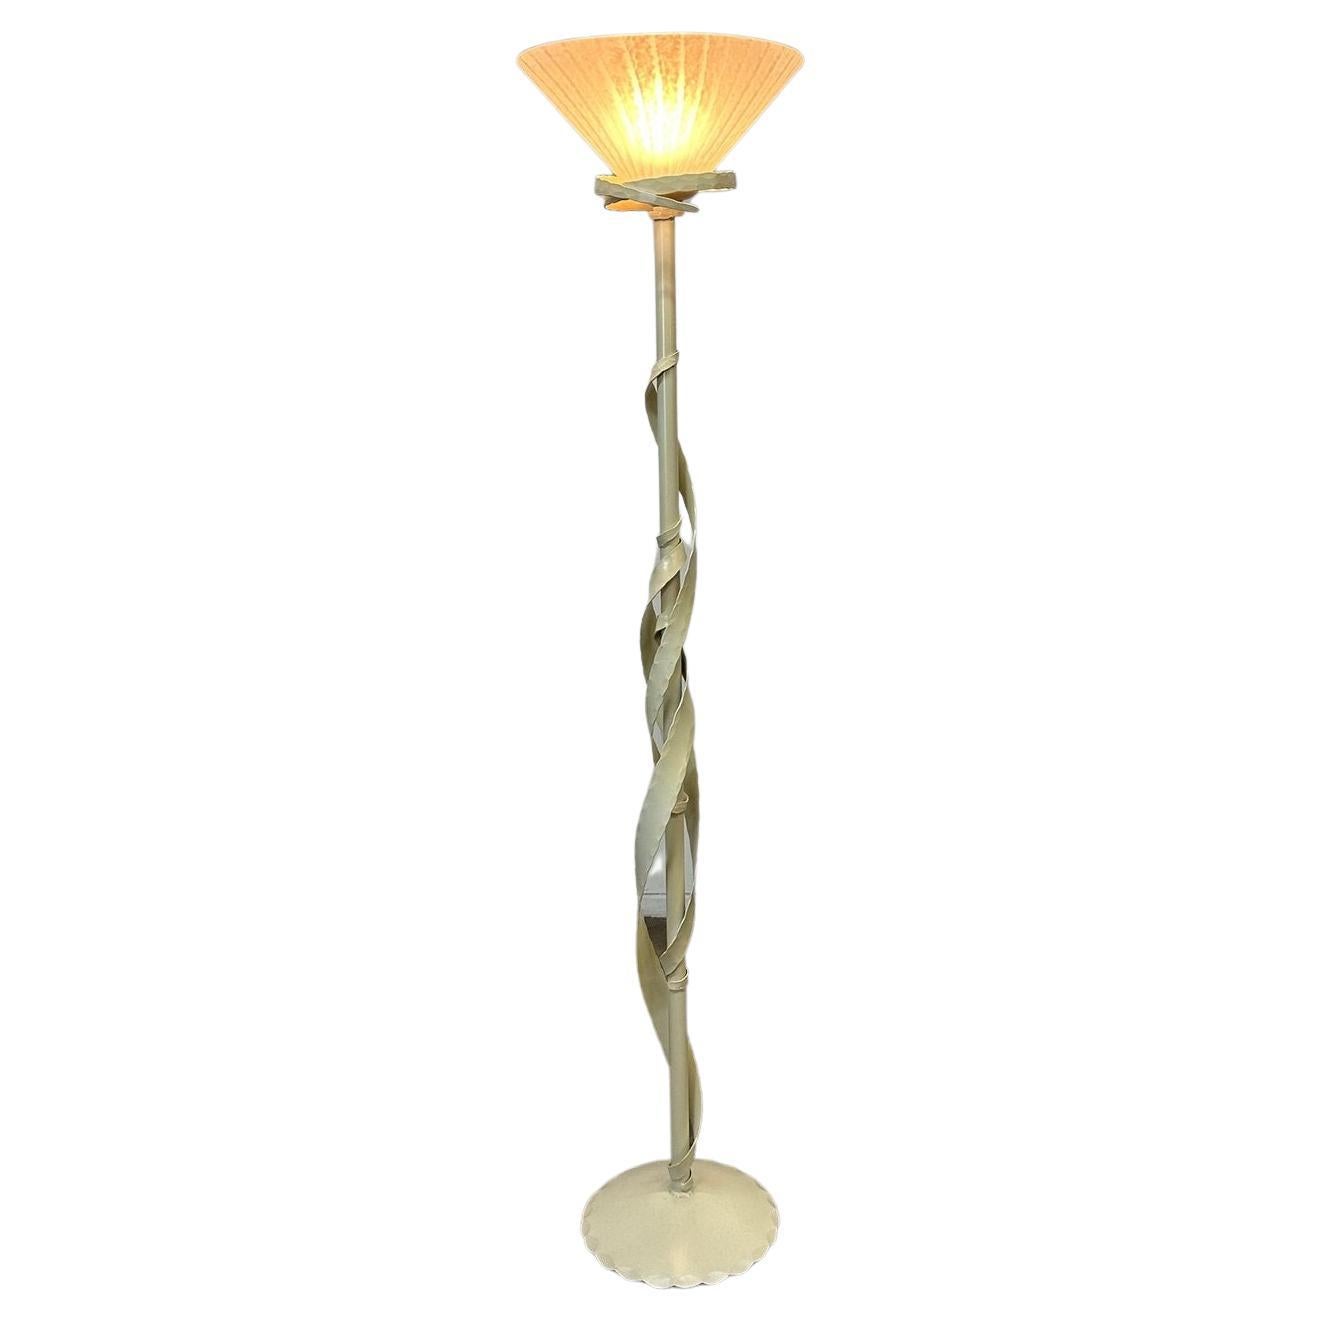 Torch Cut Style Floor Lamp, New Lacquer For Sale